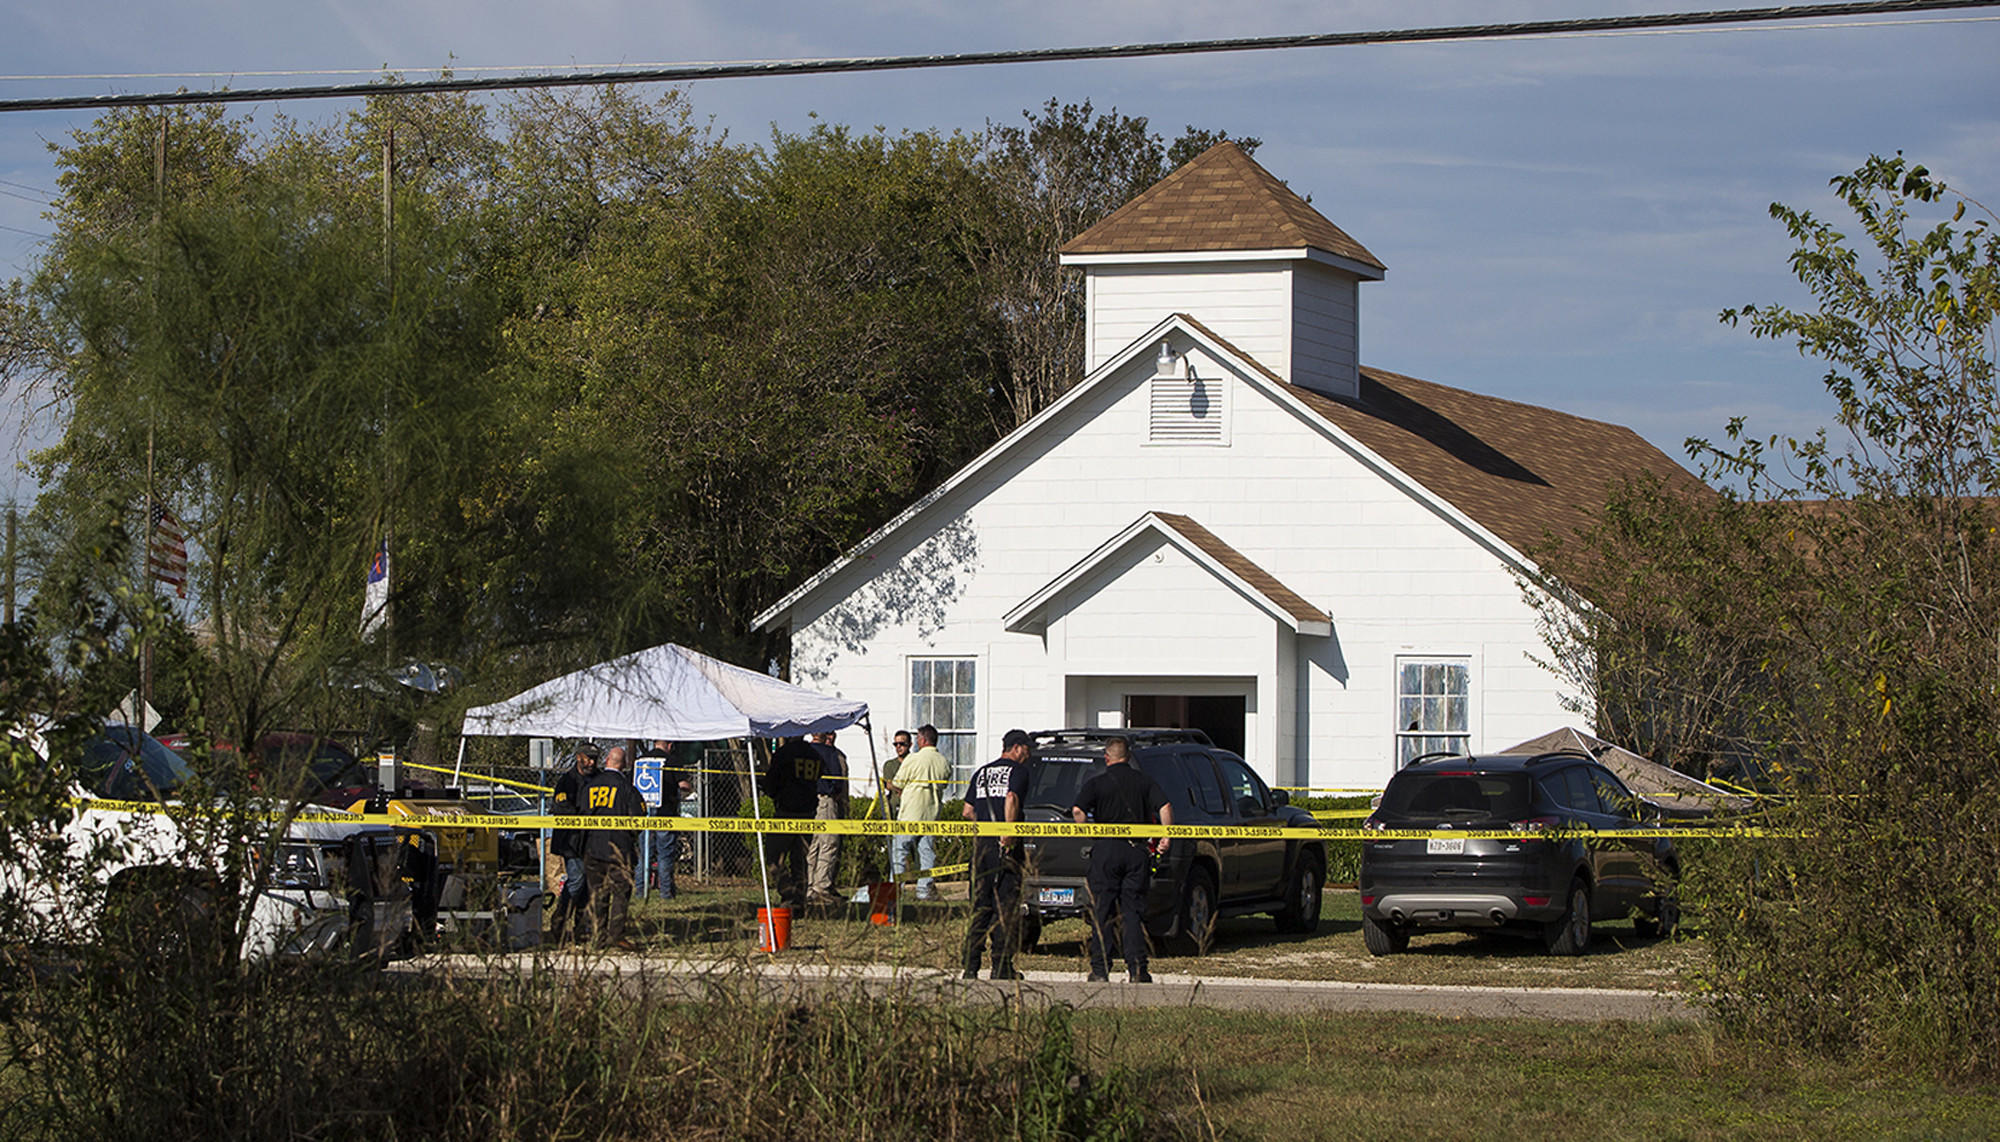 Press Release for Churches after Too Many Shootings in American Public